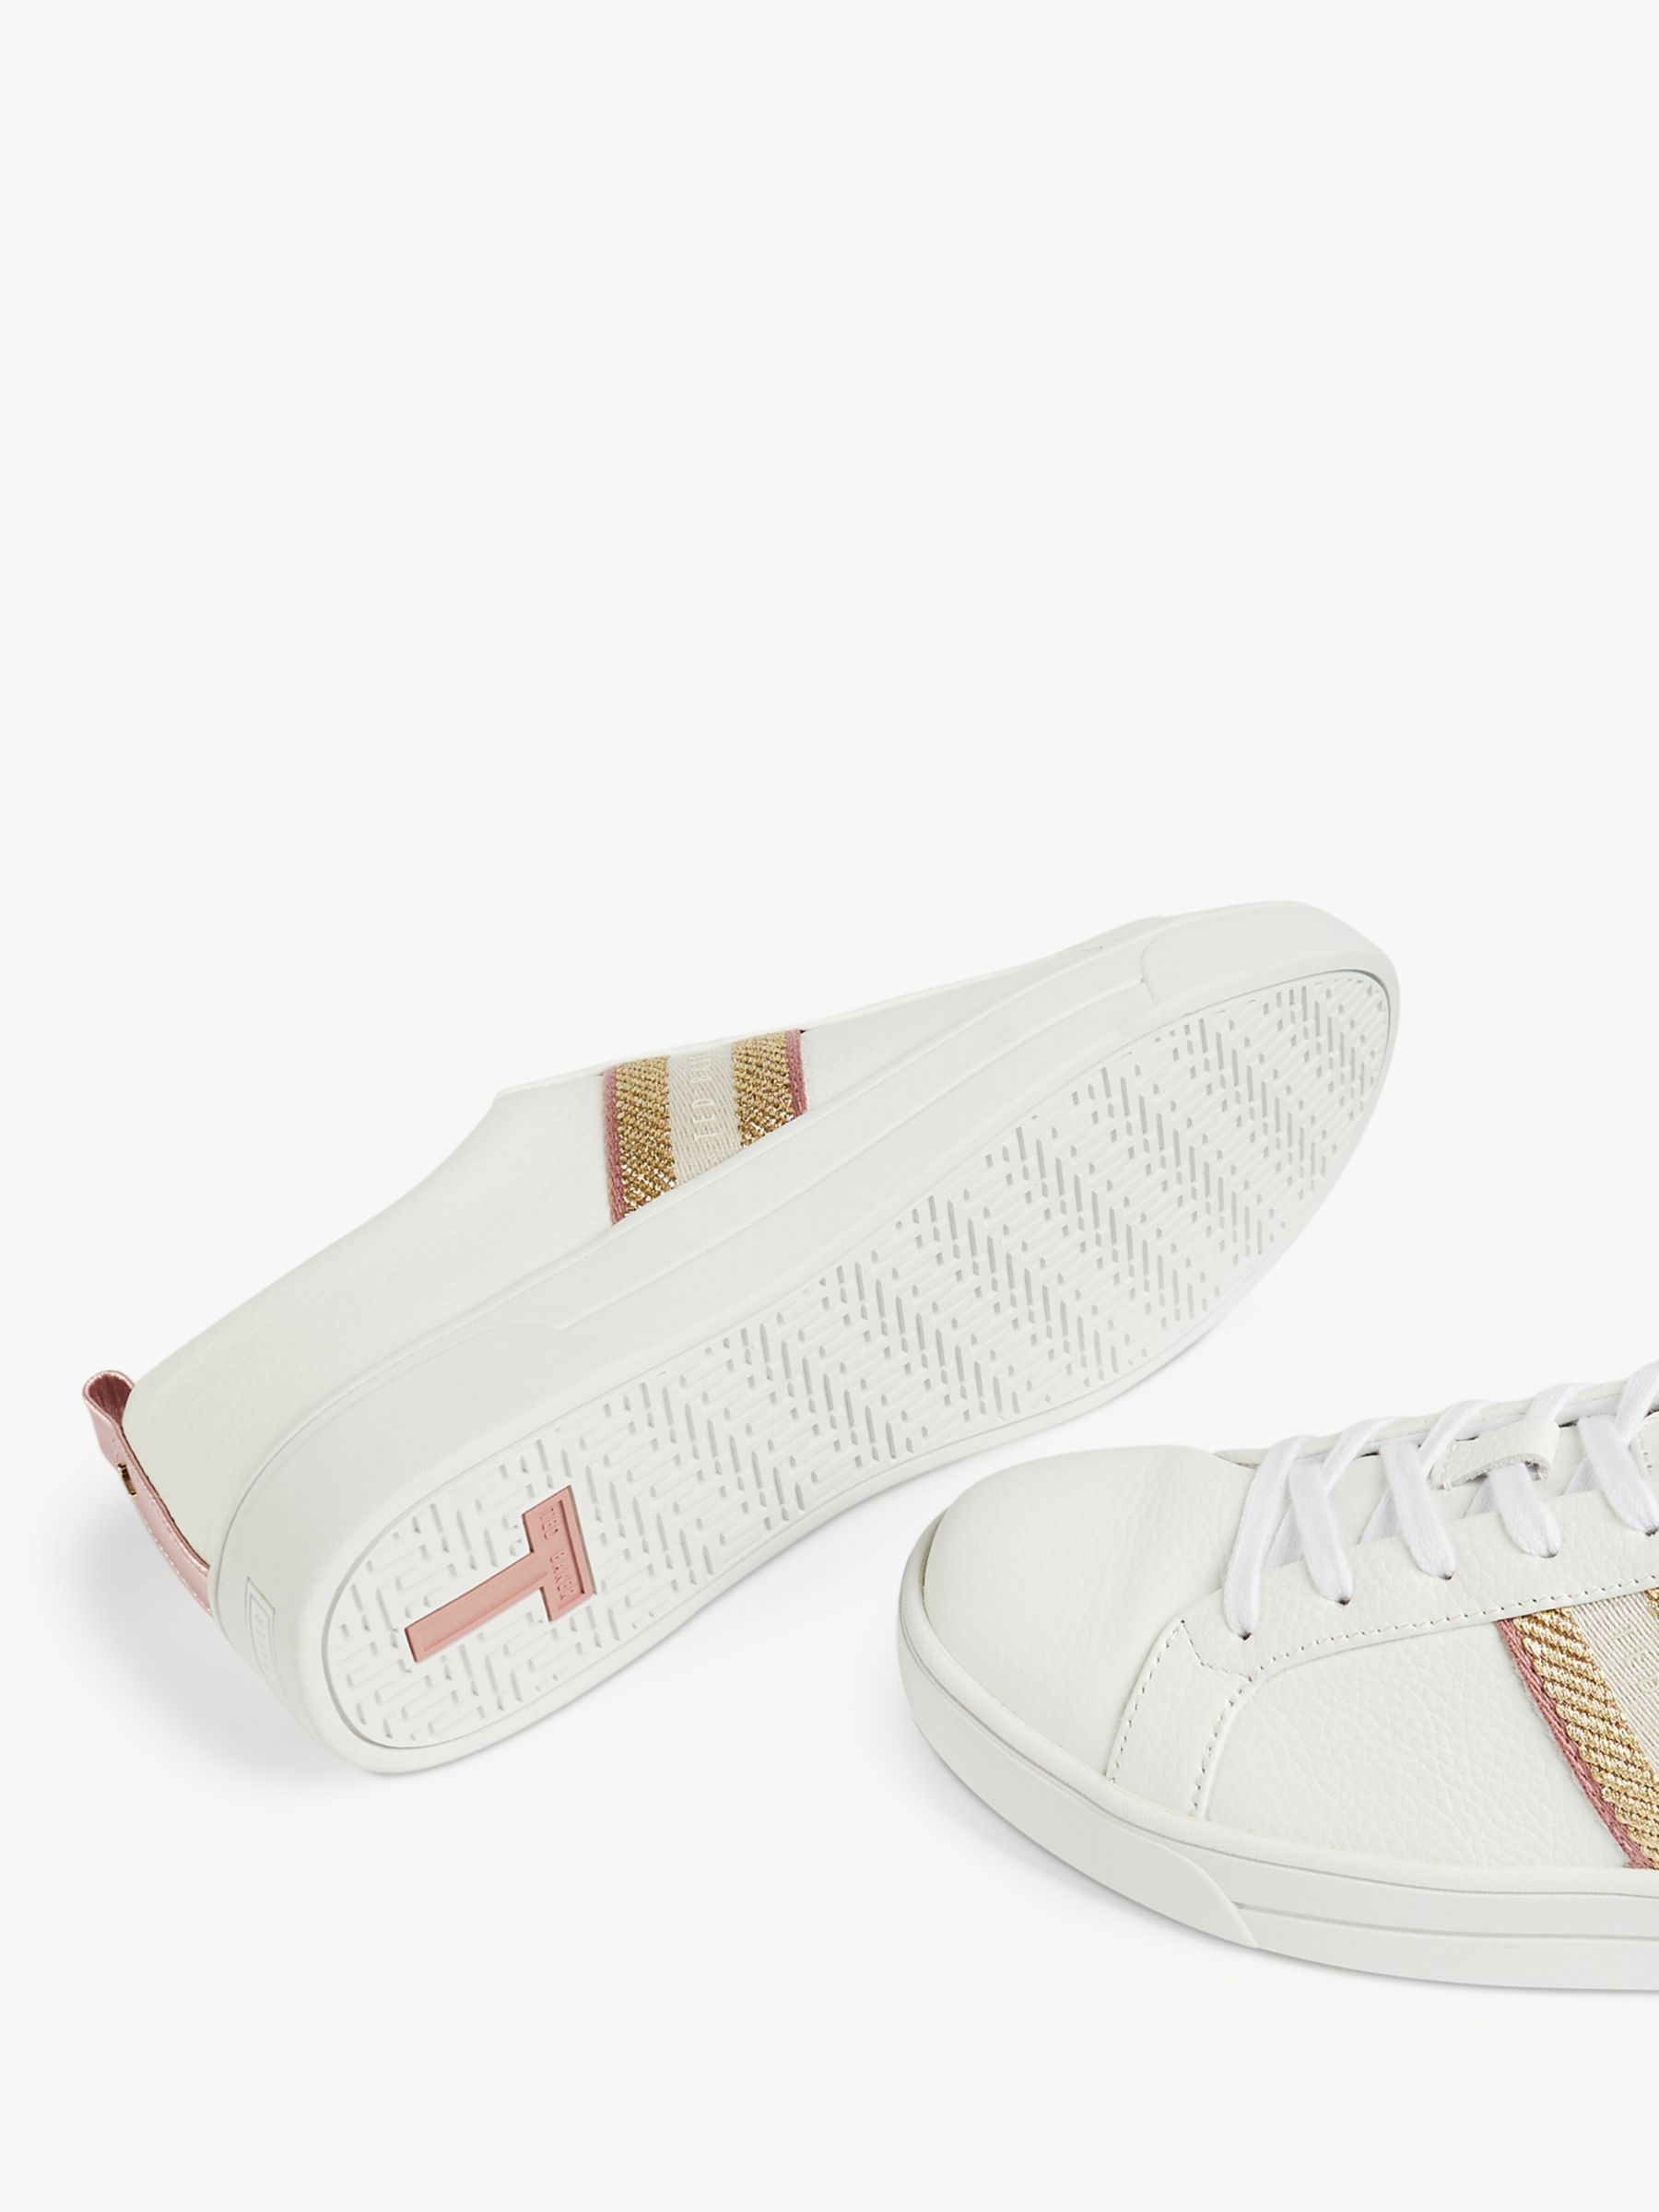 Ted Baker Baily Trainers, White/Metallic, 3